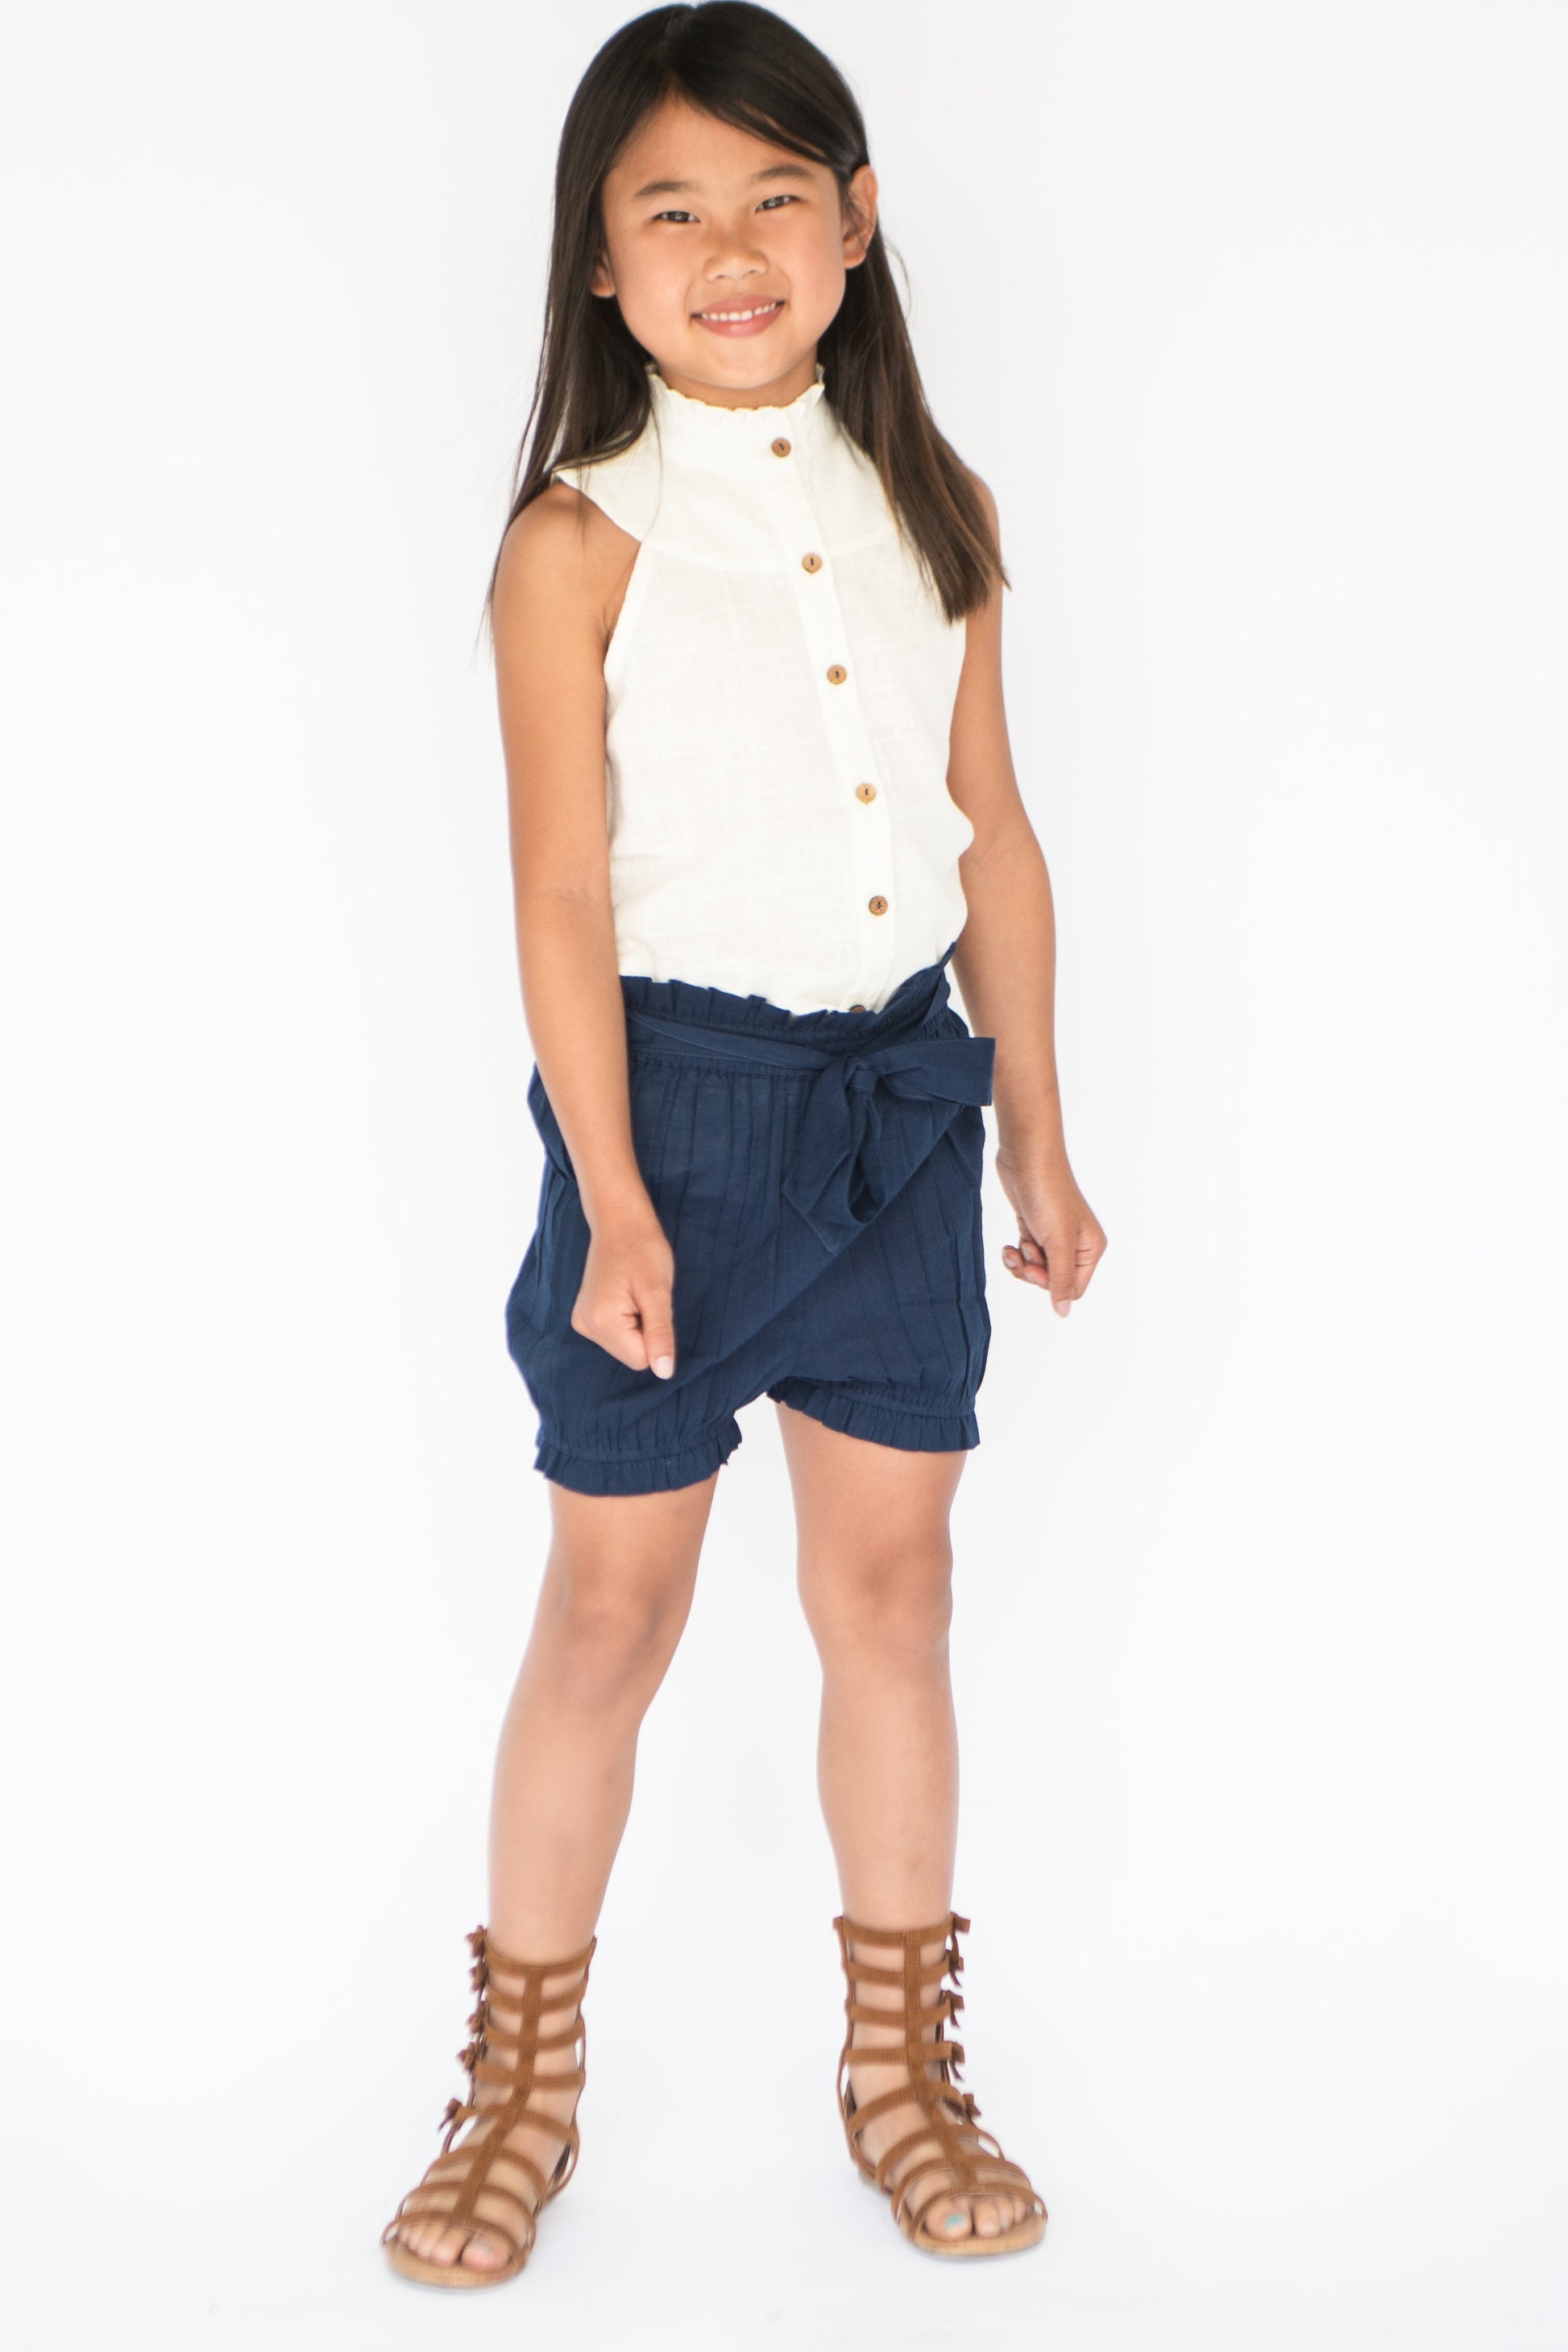 Navy-Blue High Waist Paper Bag style Shorts and Frill Blouse